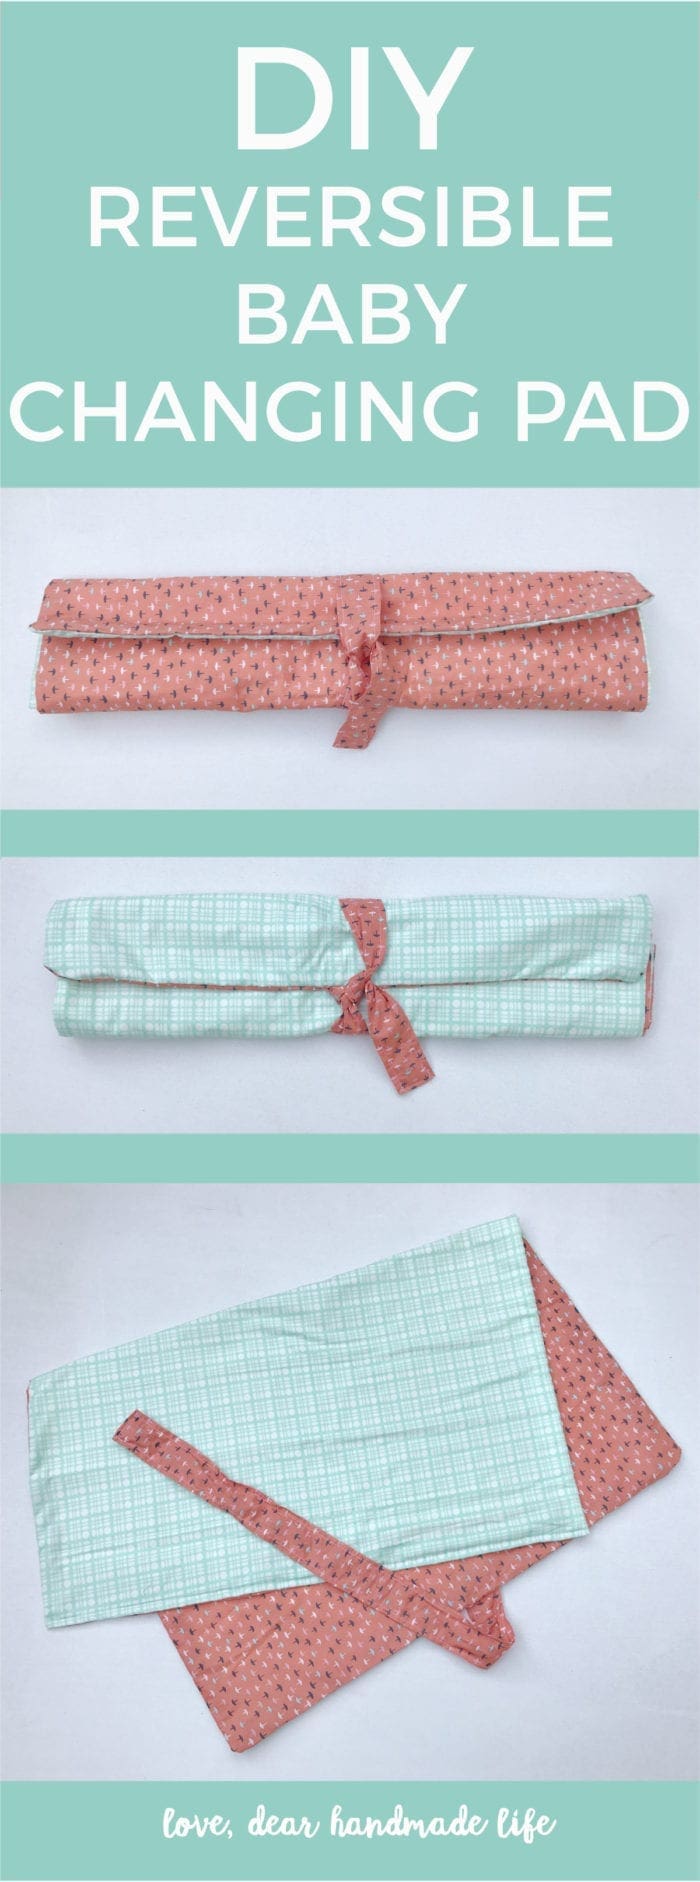 DIY Reversible Baby Changing Pad from Dear Handmade Life